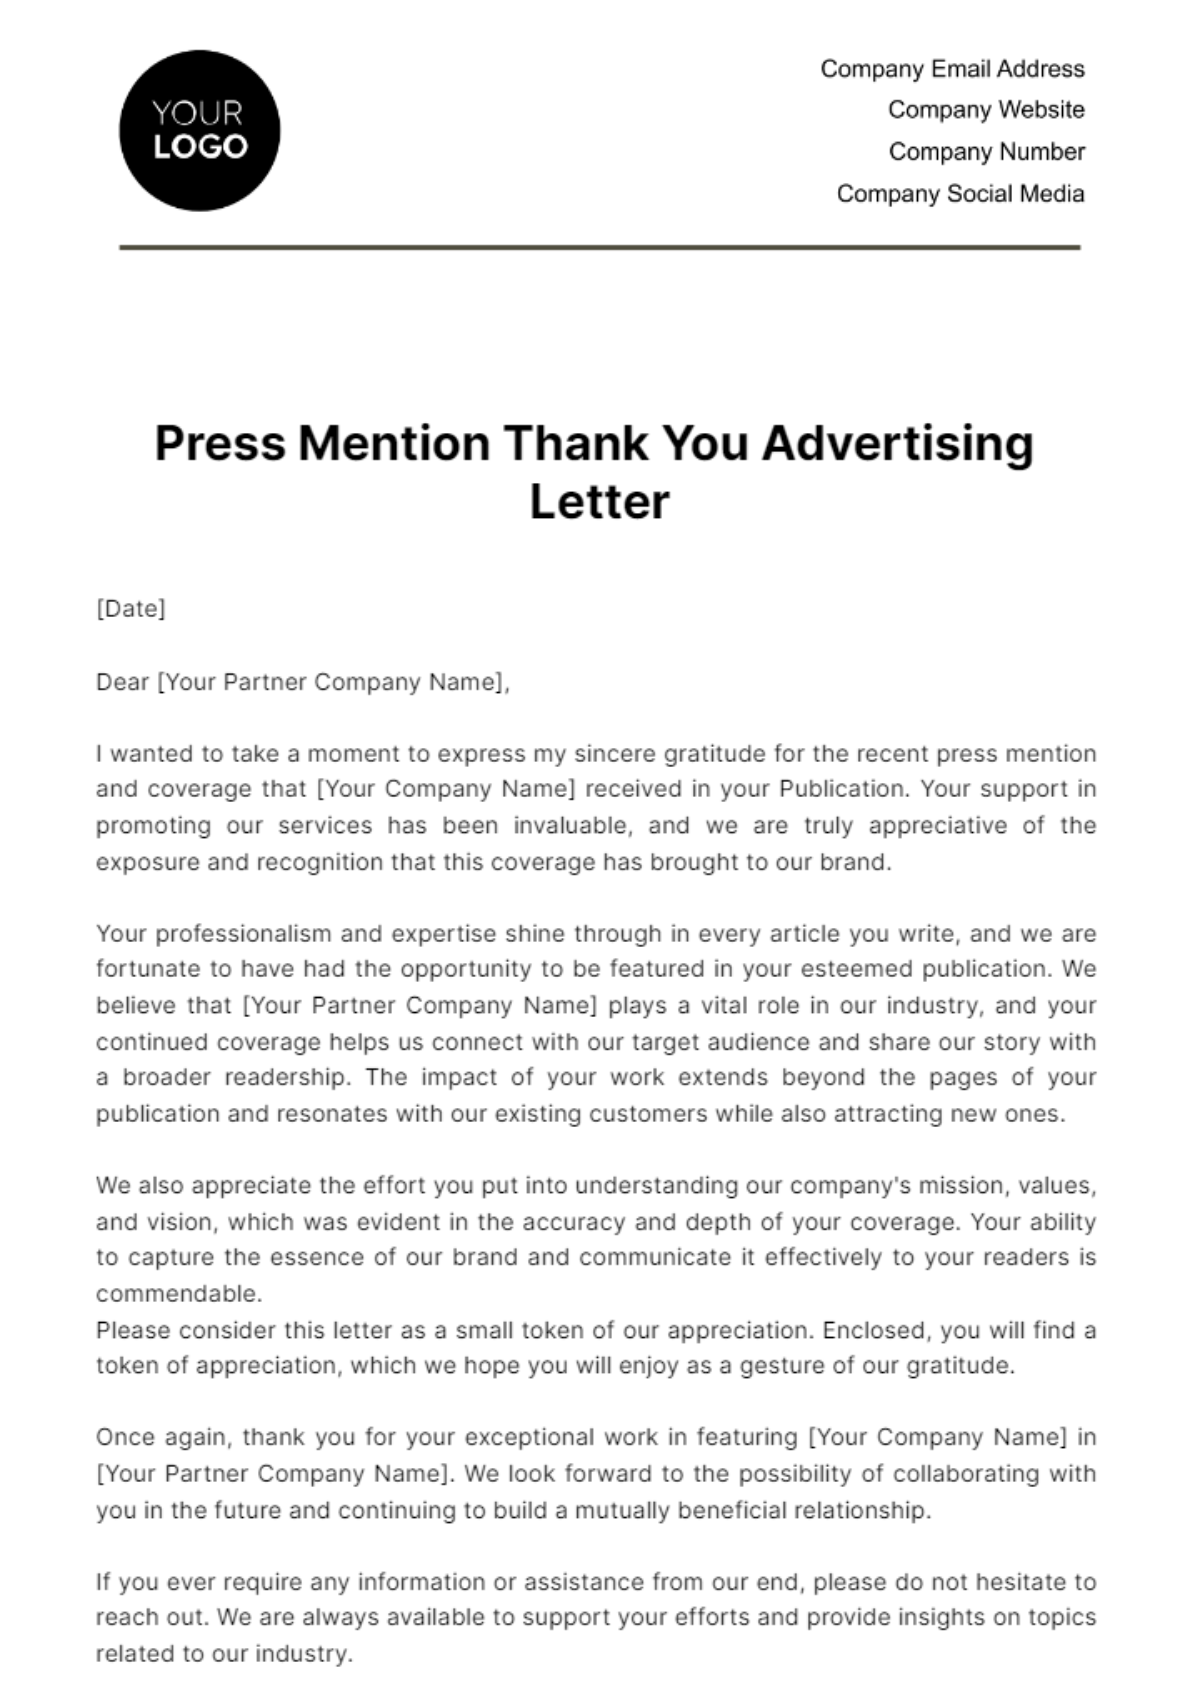 Press Mention Thank You Advertising Letter Template